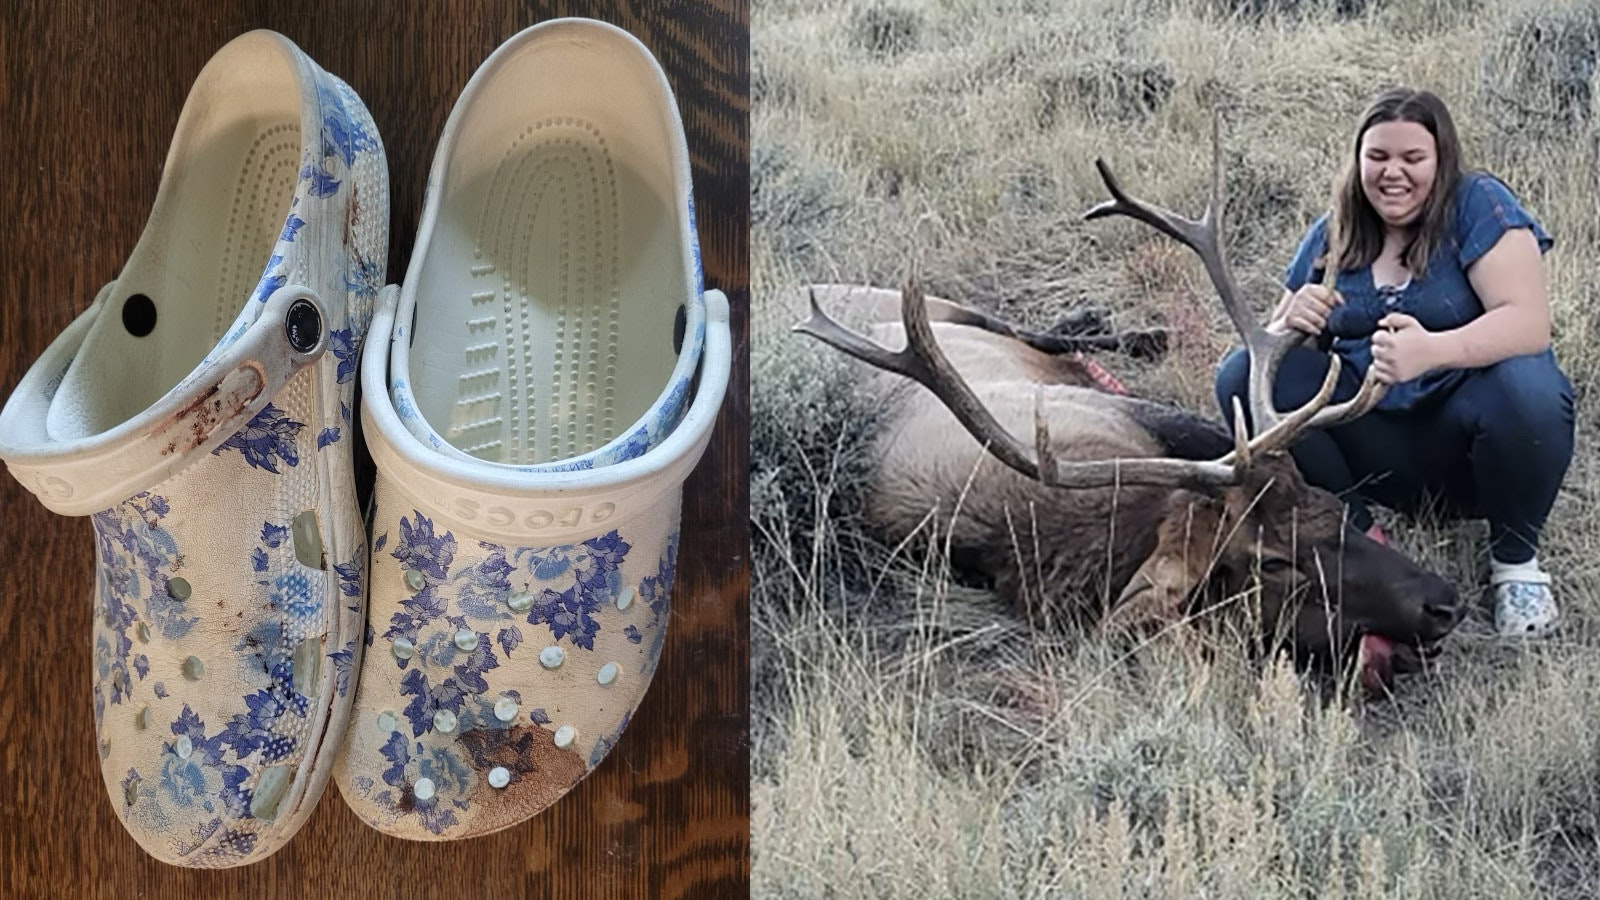 Wyoming Girl Bags First Elk While Wearing Crocs | Your Wyoming News Source